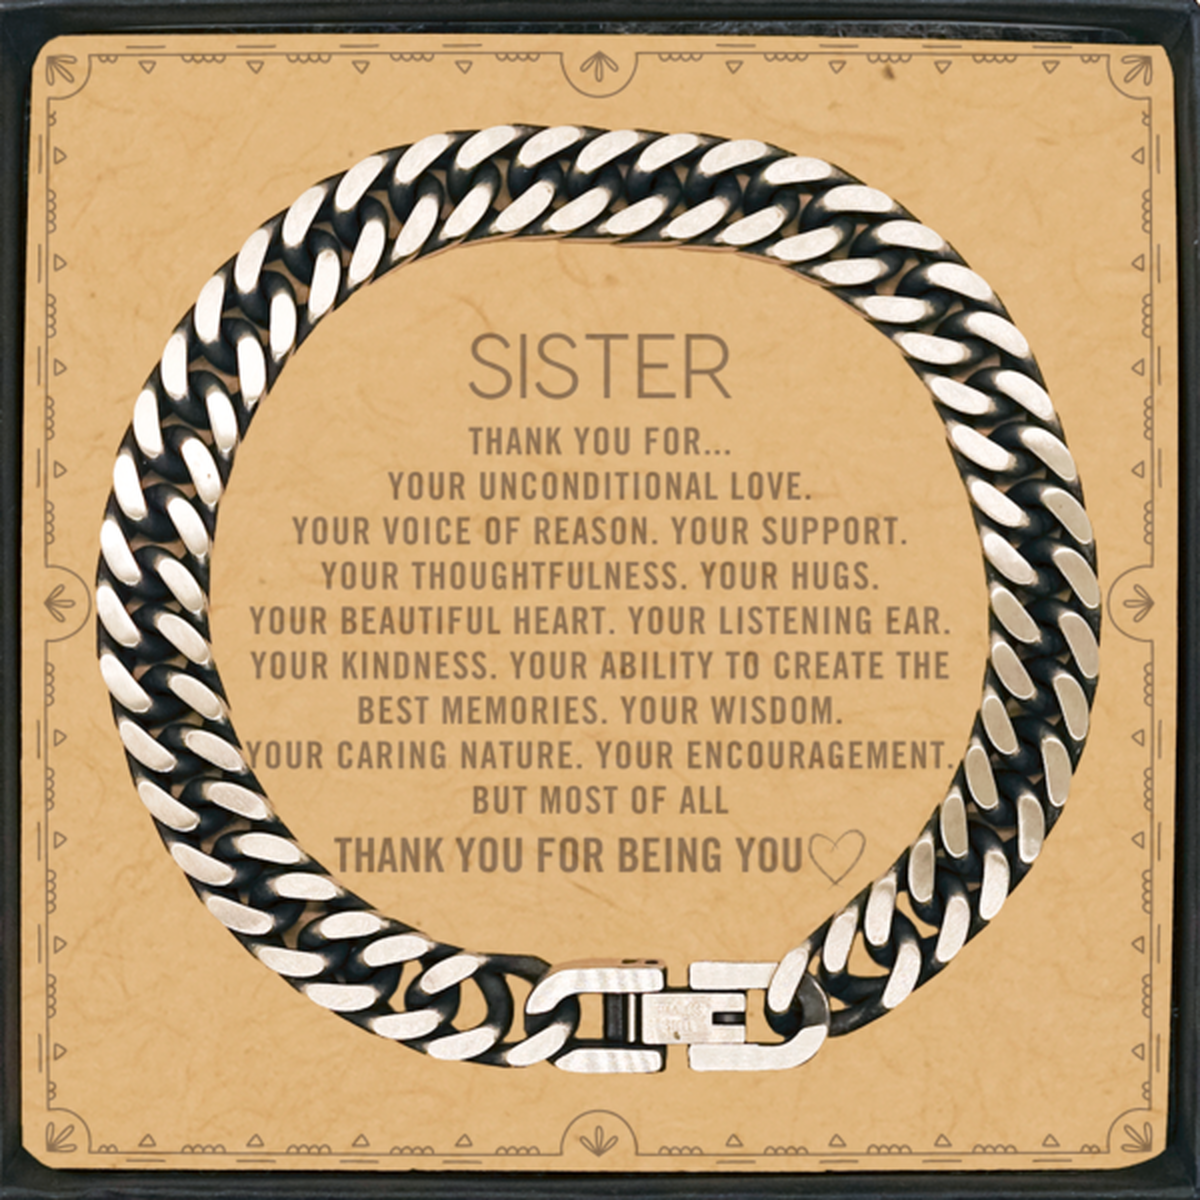 Sister Cuban Link Chain Bracelet Custom, Message Card Gifts For Sister Christmas Graduation Birthday Gifts for Men Women Sister Thank you for Your unconditional love